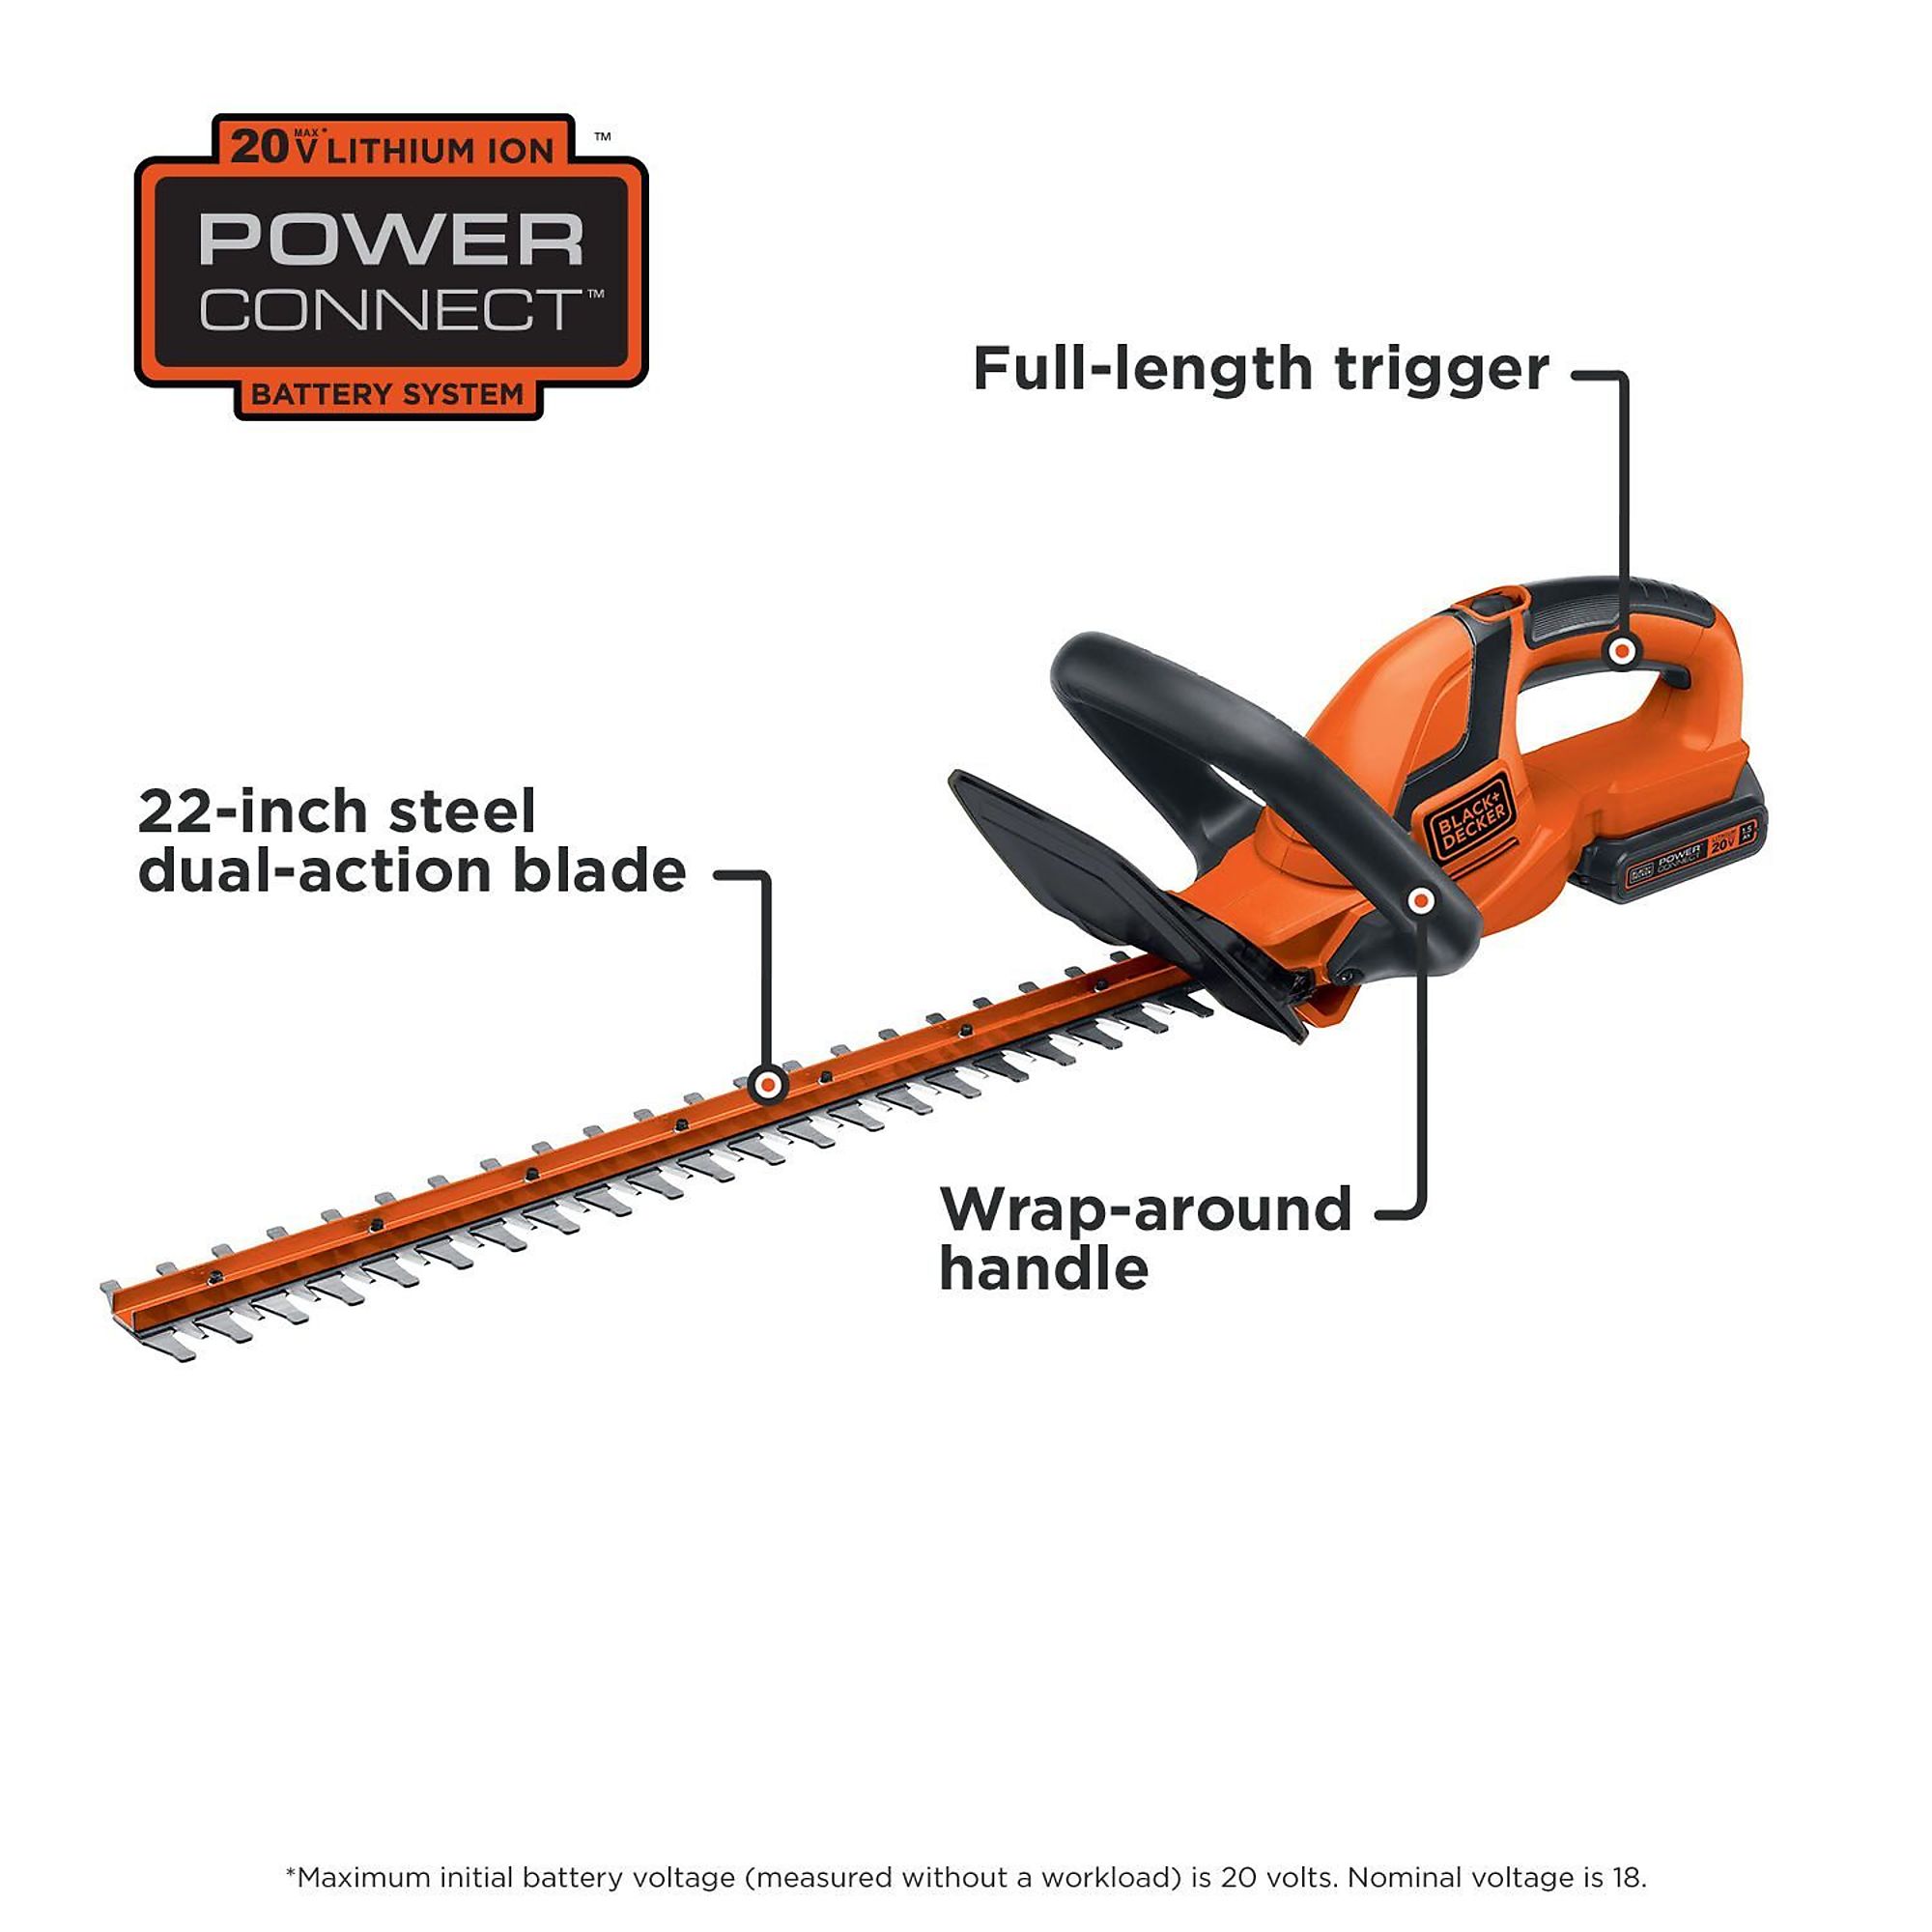 Black+decker LHT2220B 22 in. 20V Max Lithium-Ion Cordless Hedge Trimmer (Tool Only)